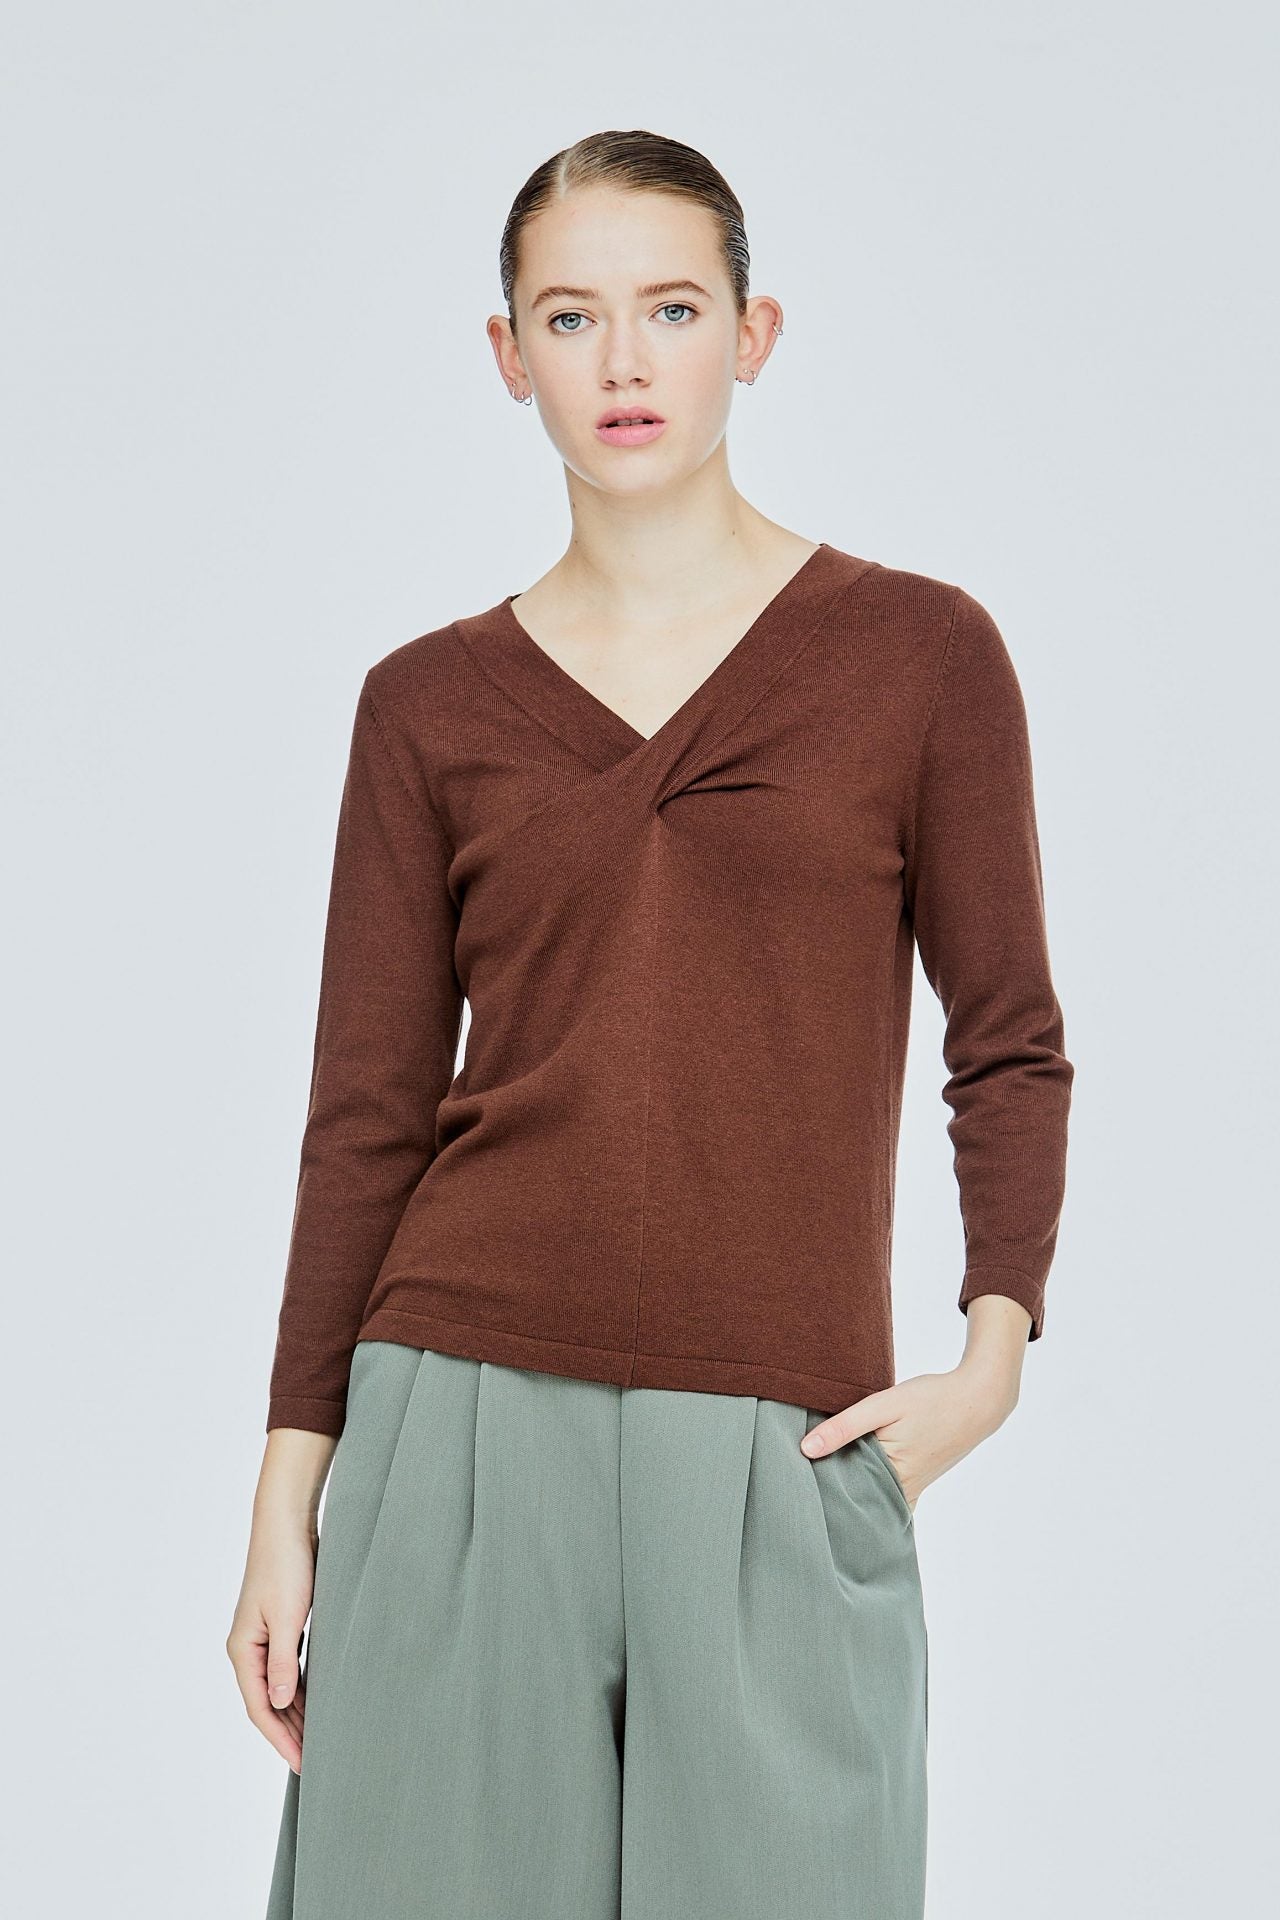 AKL 11513 TWISTED KNIT TOP BROWN